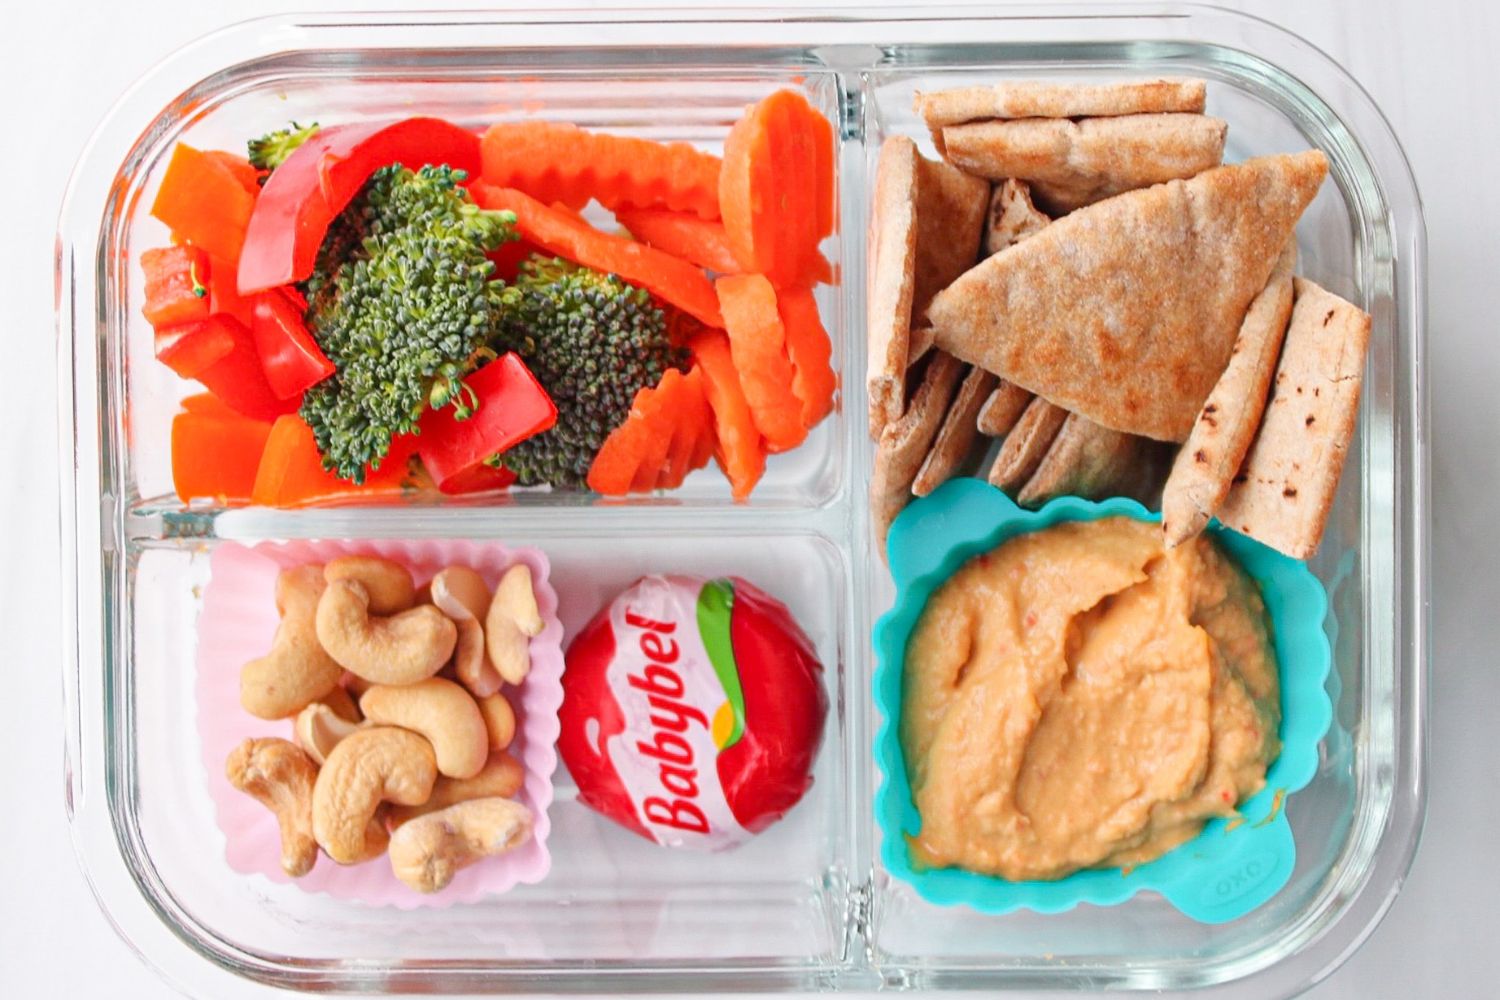 An adult lunchable with veggies, nuts, cheese, hummus and pita bread.